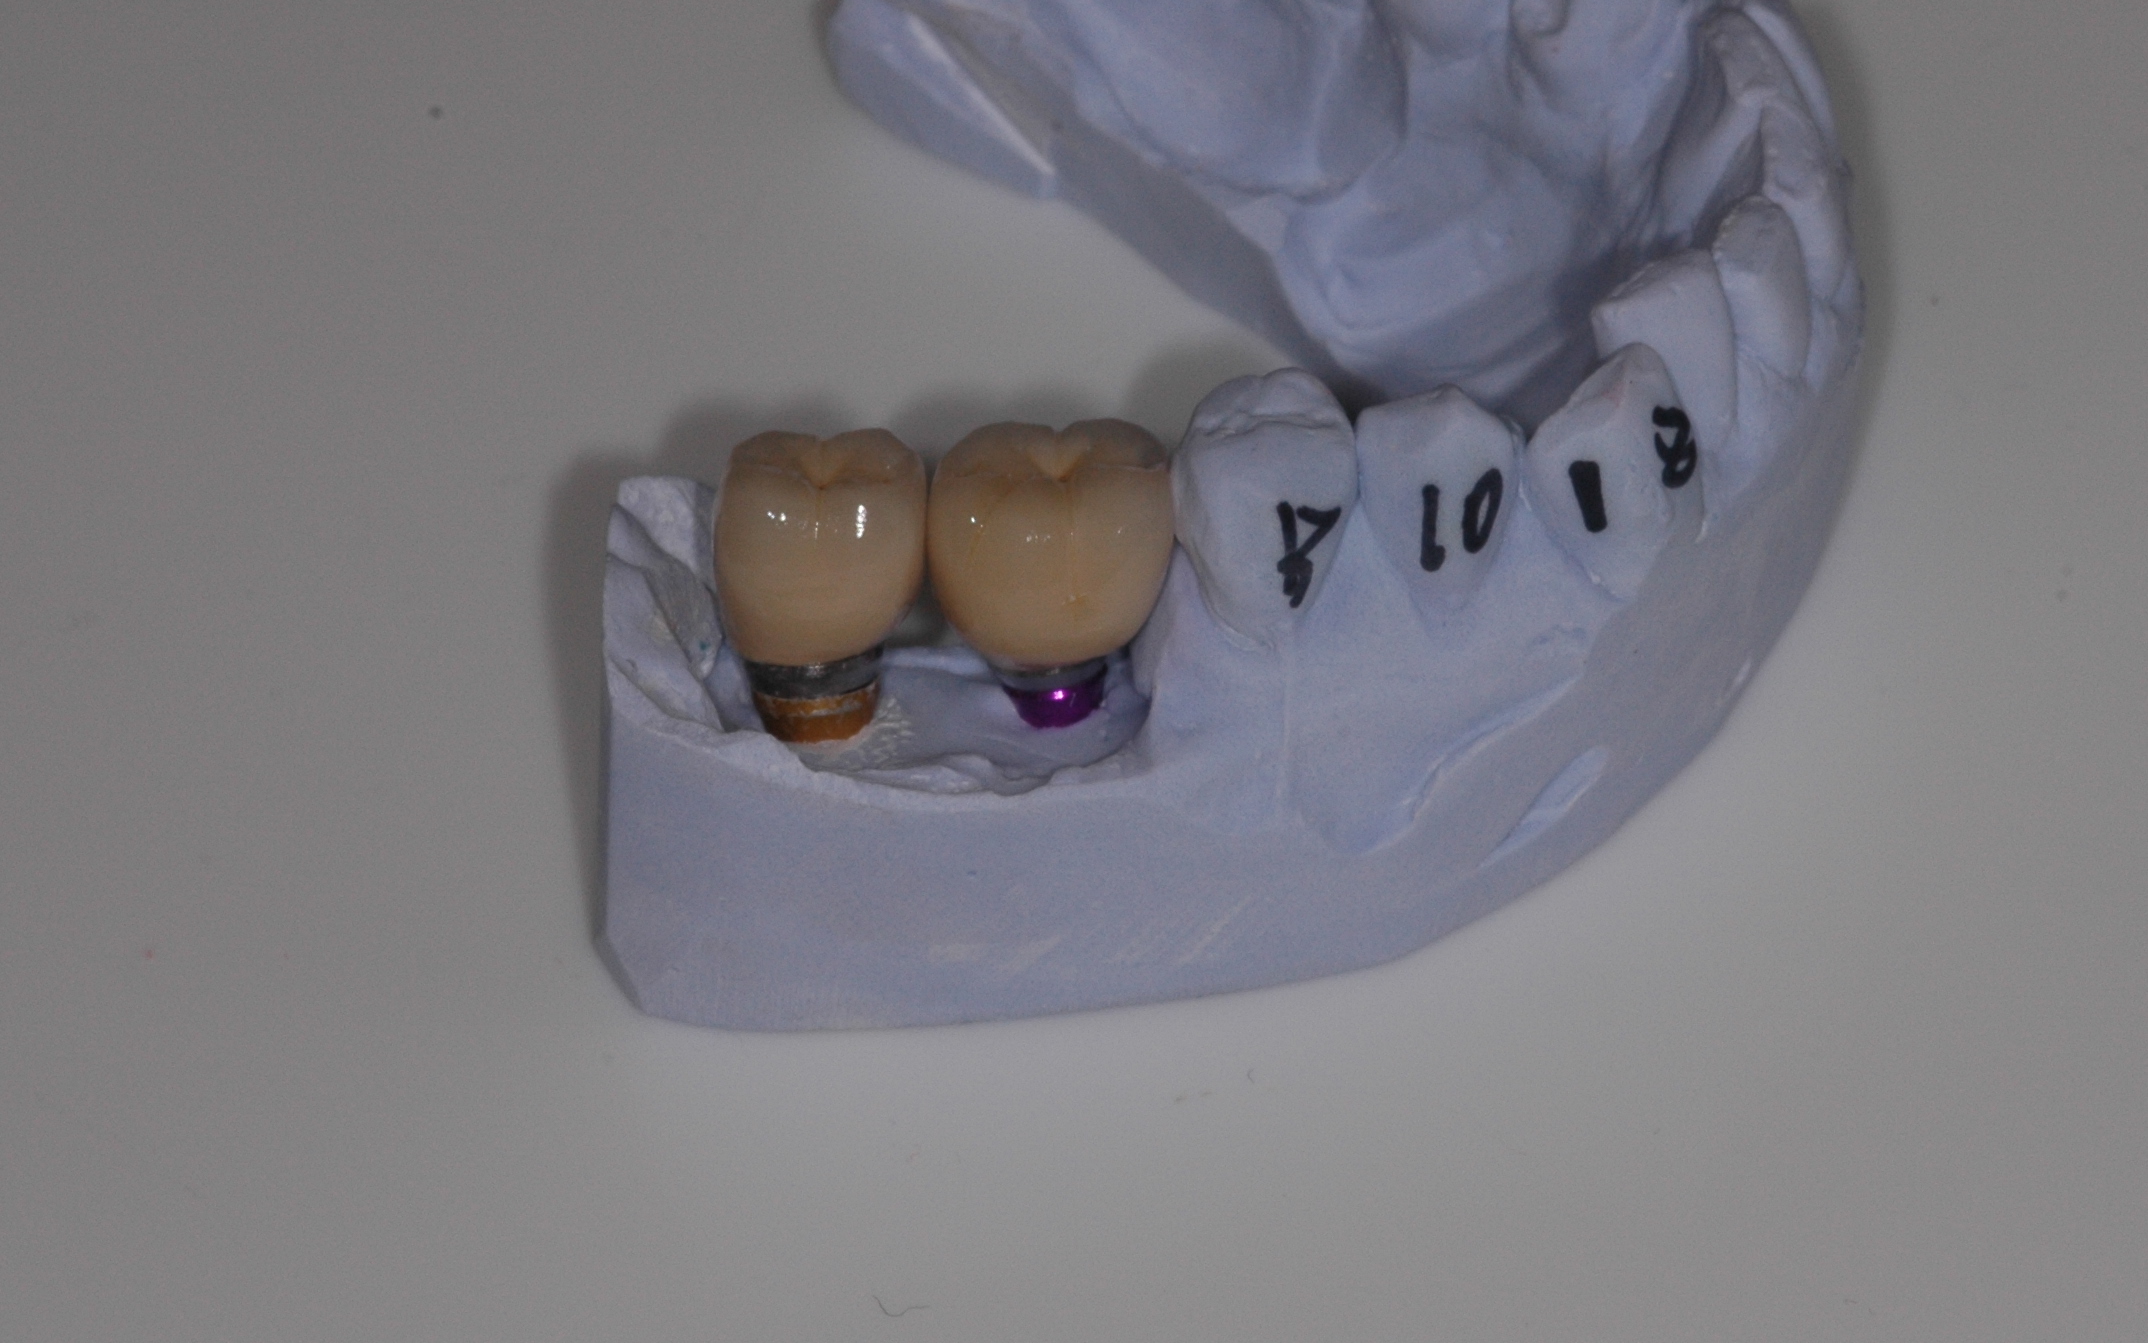 two missing molar teeth replaced with dental implants